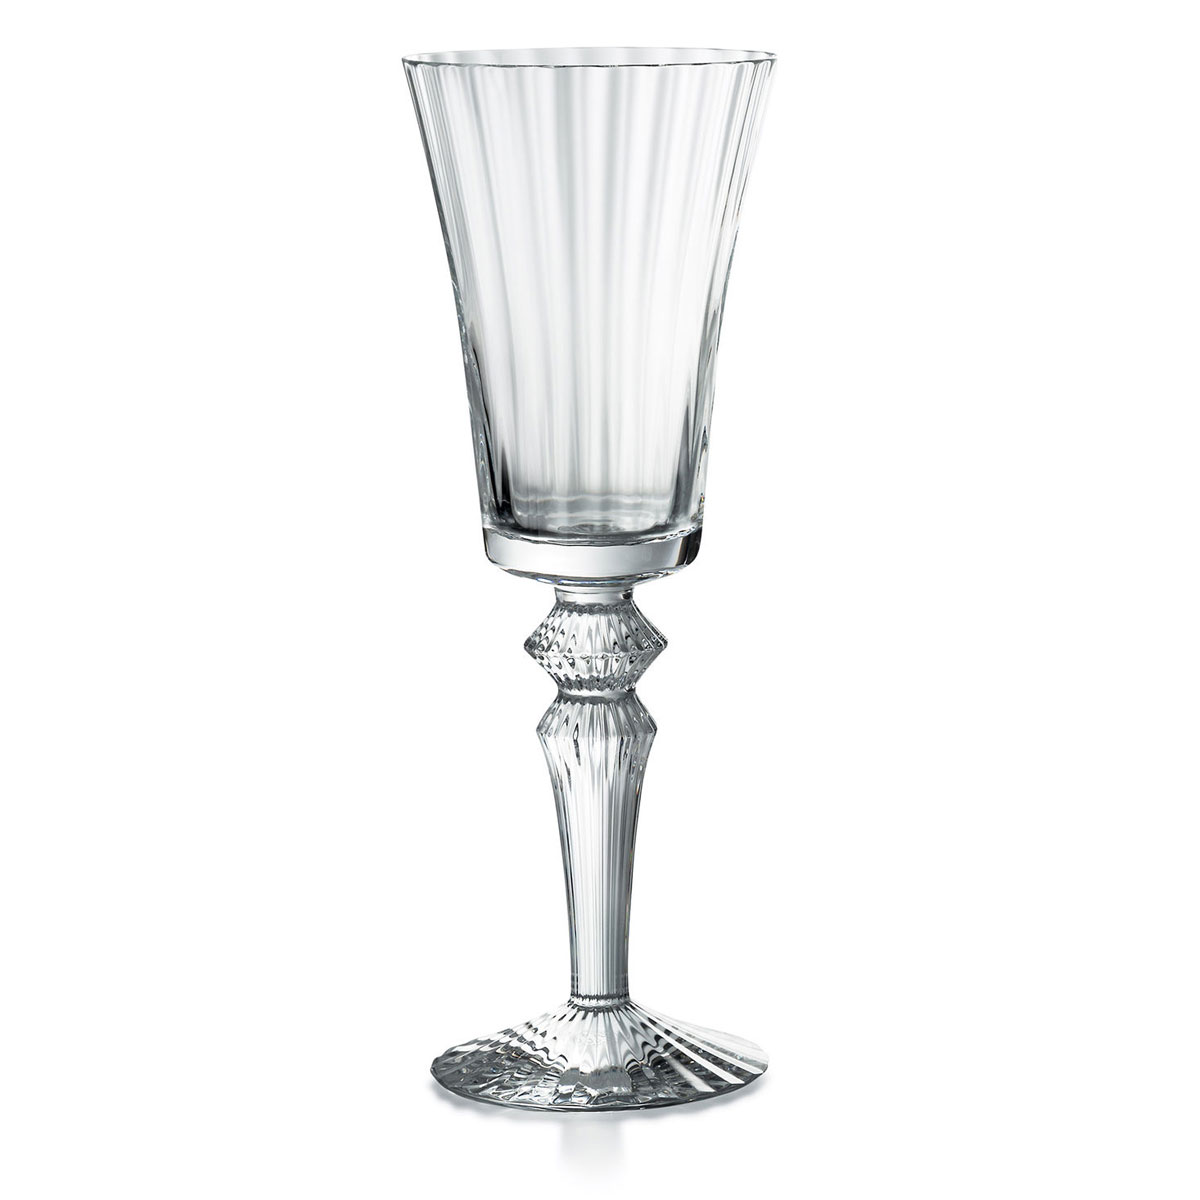 Baccarat Crystal, Mille Nuits Tall American Water Goblet, No 1, Single